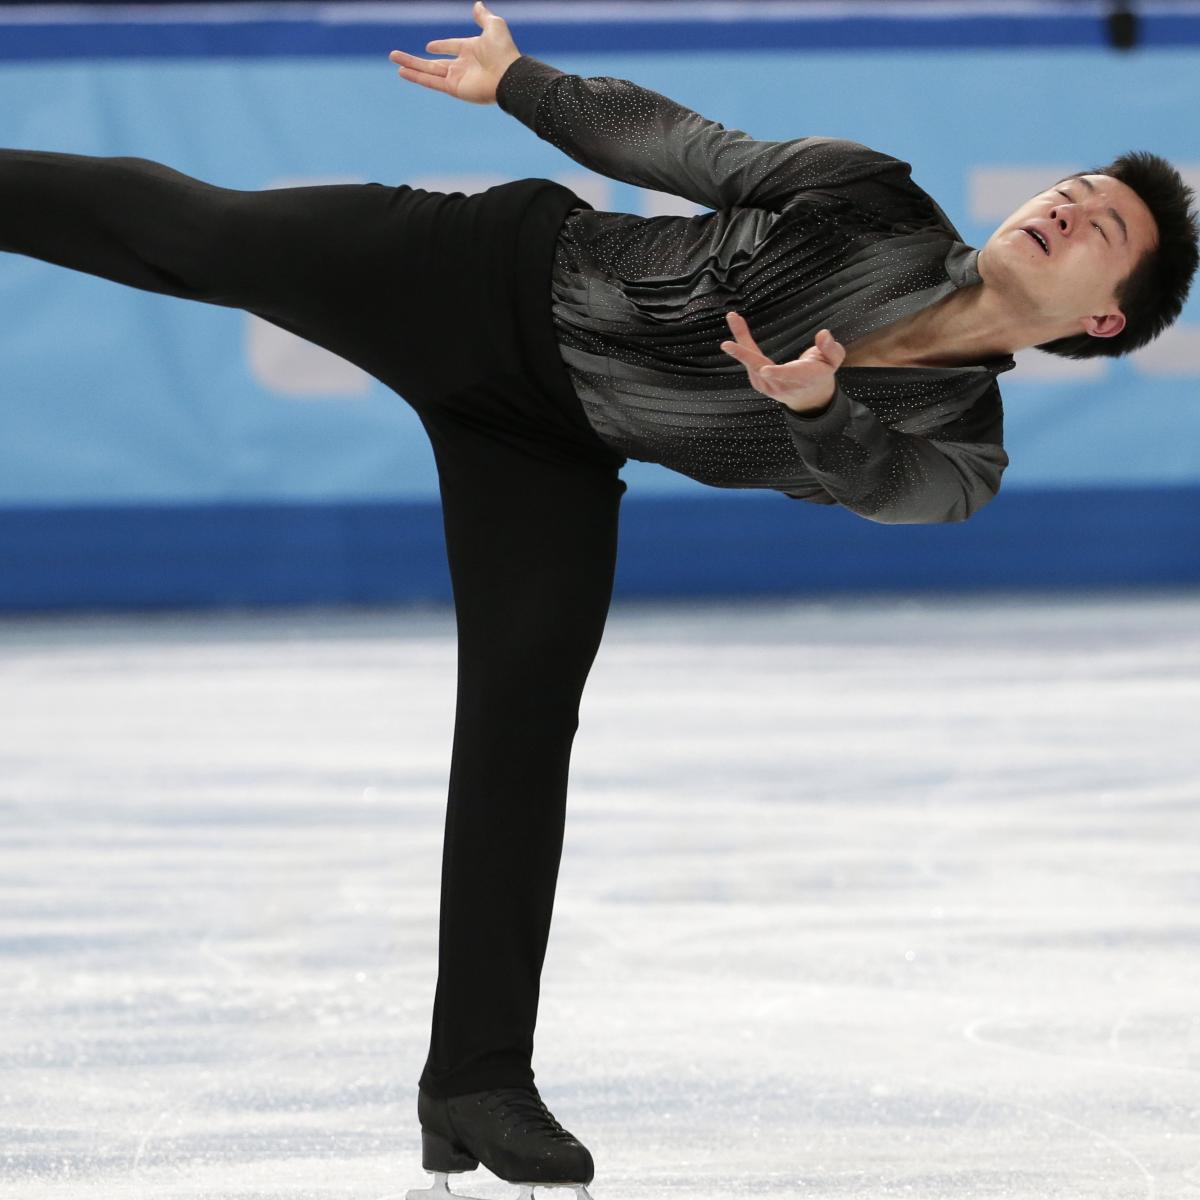 Men's Figure Skating Olympics 2014 Most Exciting Stars to Watch in